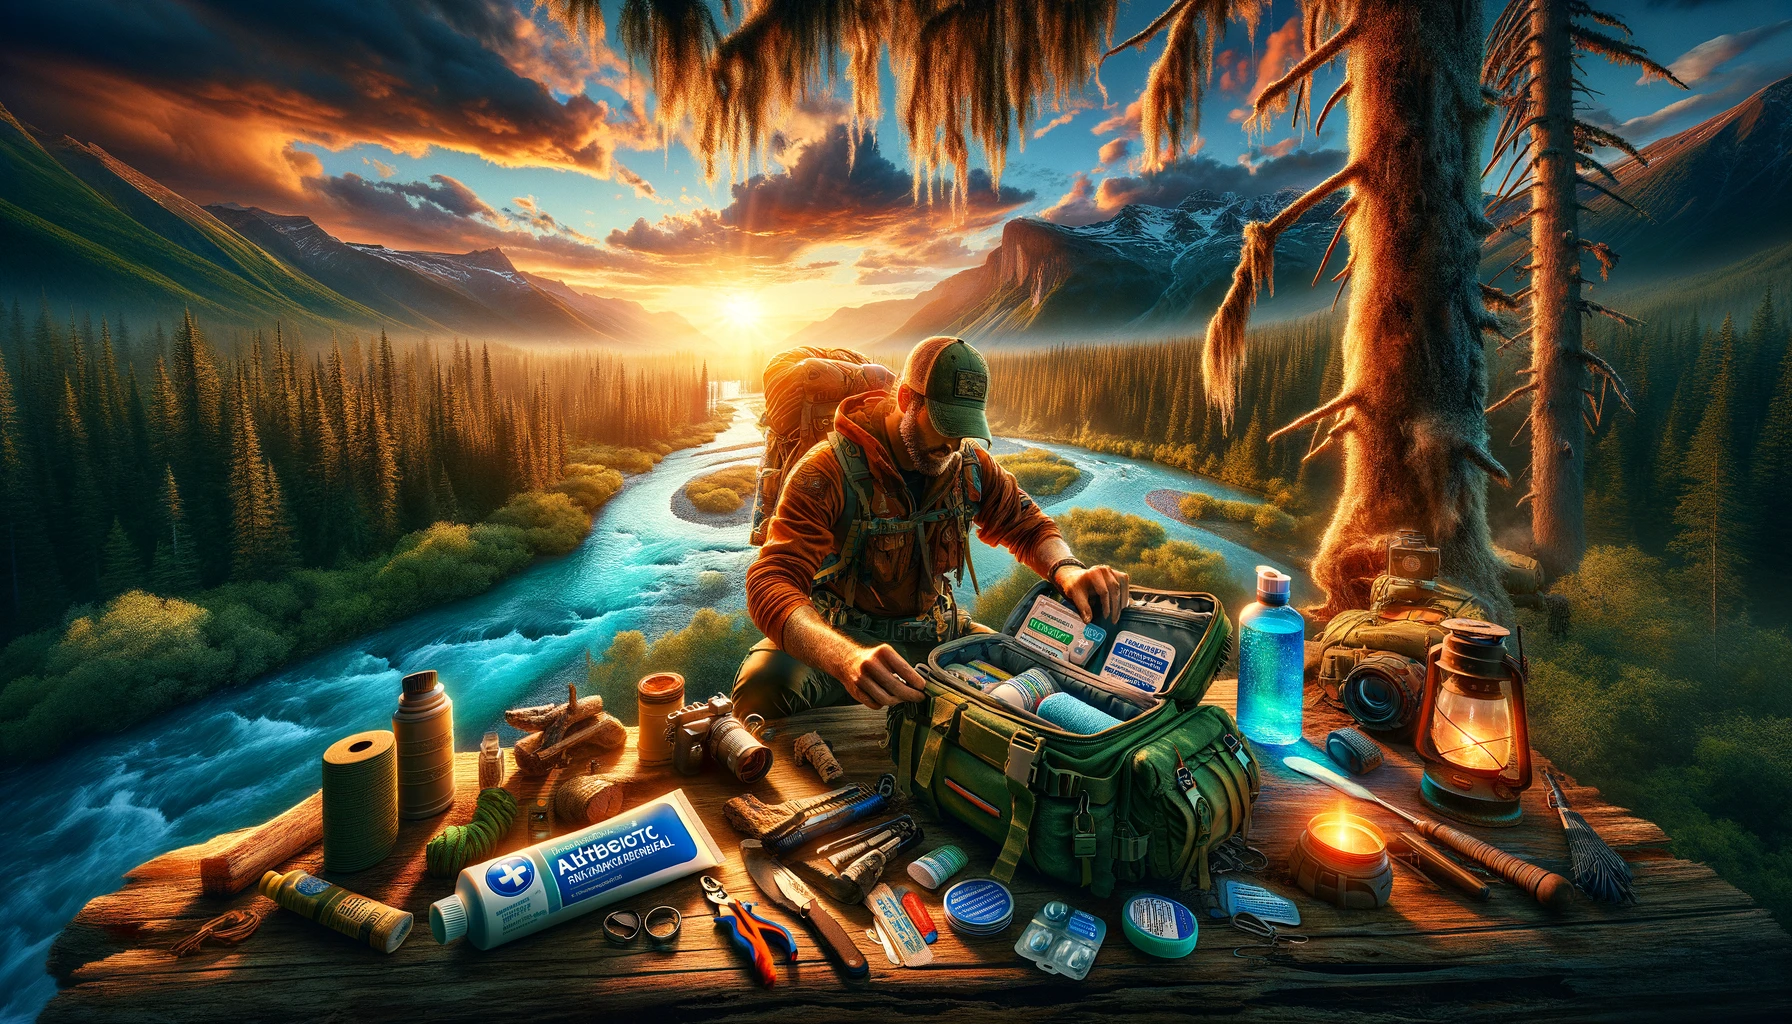 Rugged individual packing survival gear including water purifier, fire starter, and antibiotic ointment in a backpack, at dusk in a wild forest with a flowing river, symbolizing adventure and preparedness for wilderness exploration